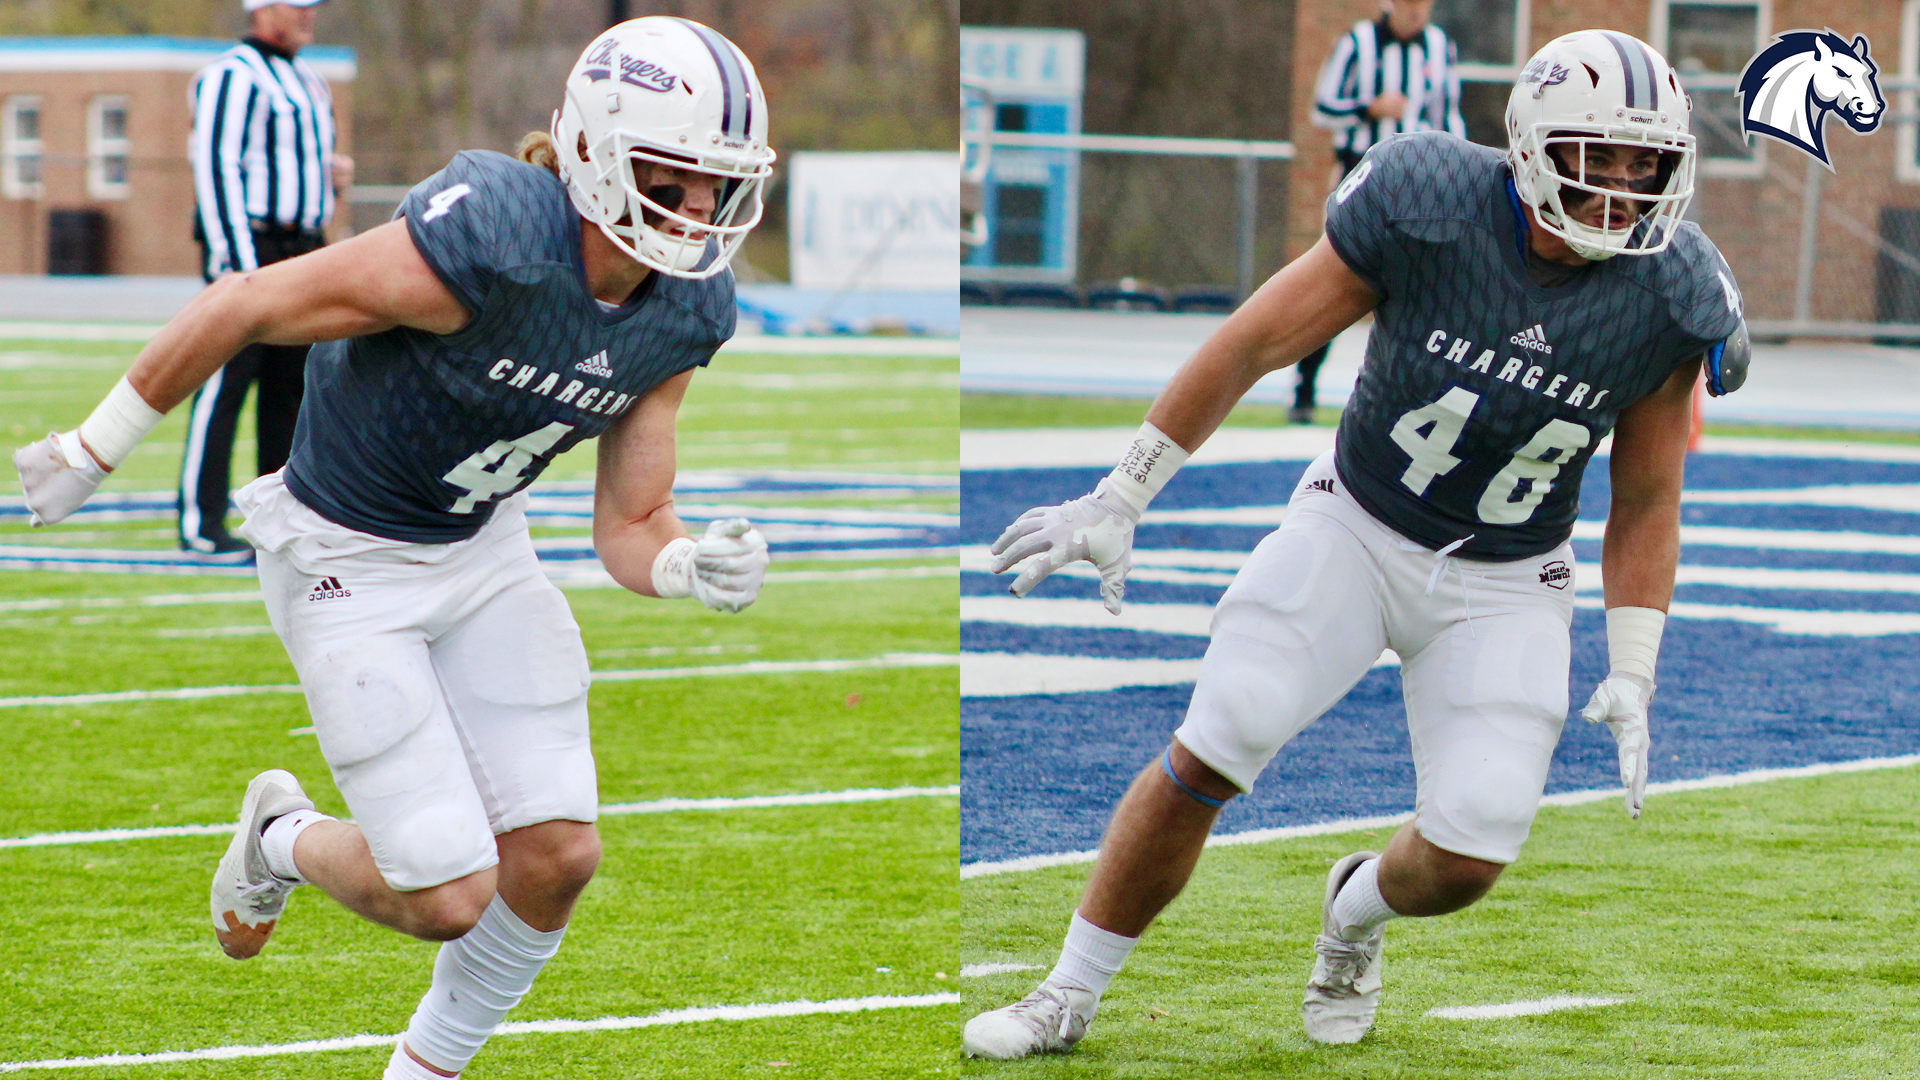 TeSlaa, Kudla named honorable mention All-Americans by Don Hansen Football Committee